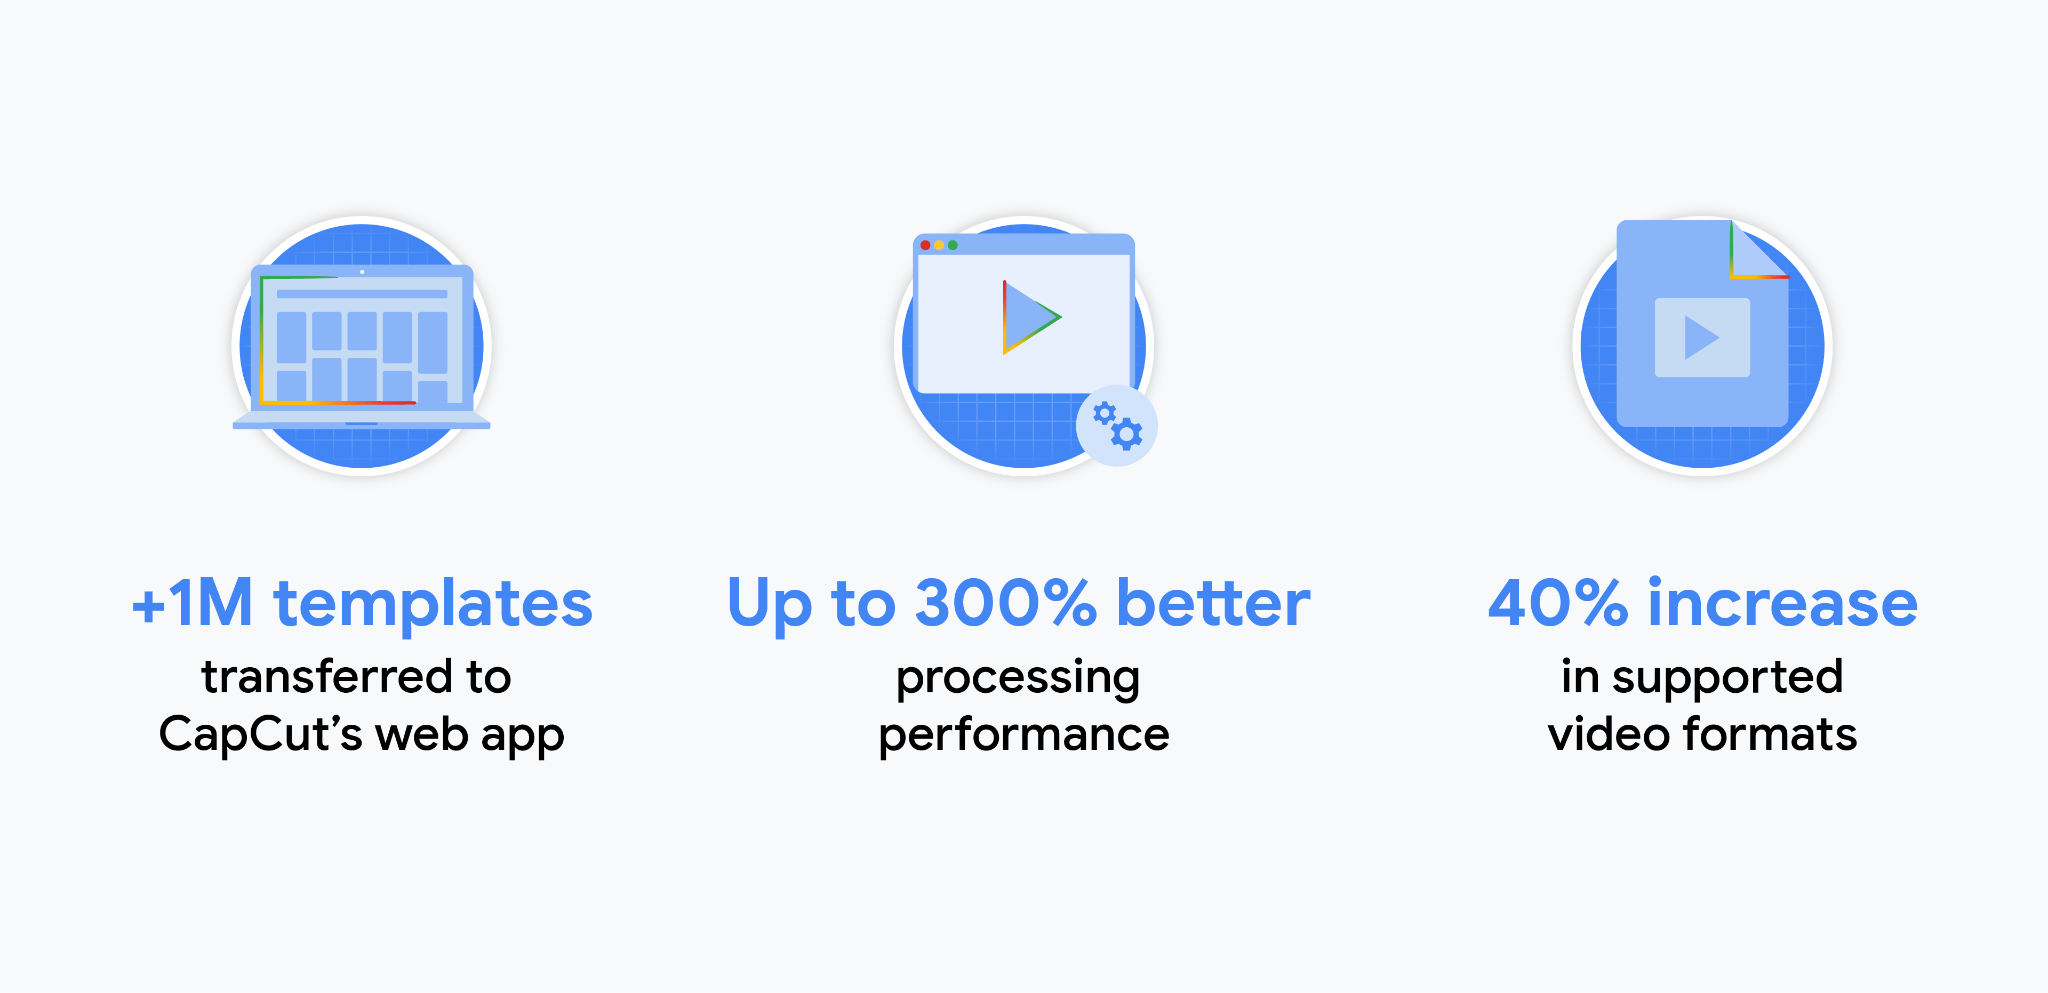 Stats about the CapCut app: More than one million templates transferred to CapCut's web app. Up to 300% better processing performance. 40% increase in supported video formats.